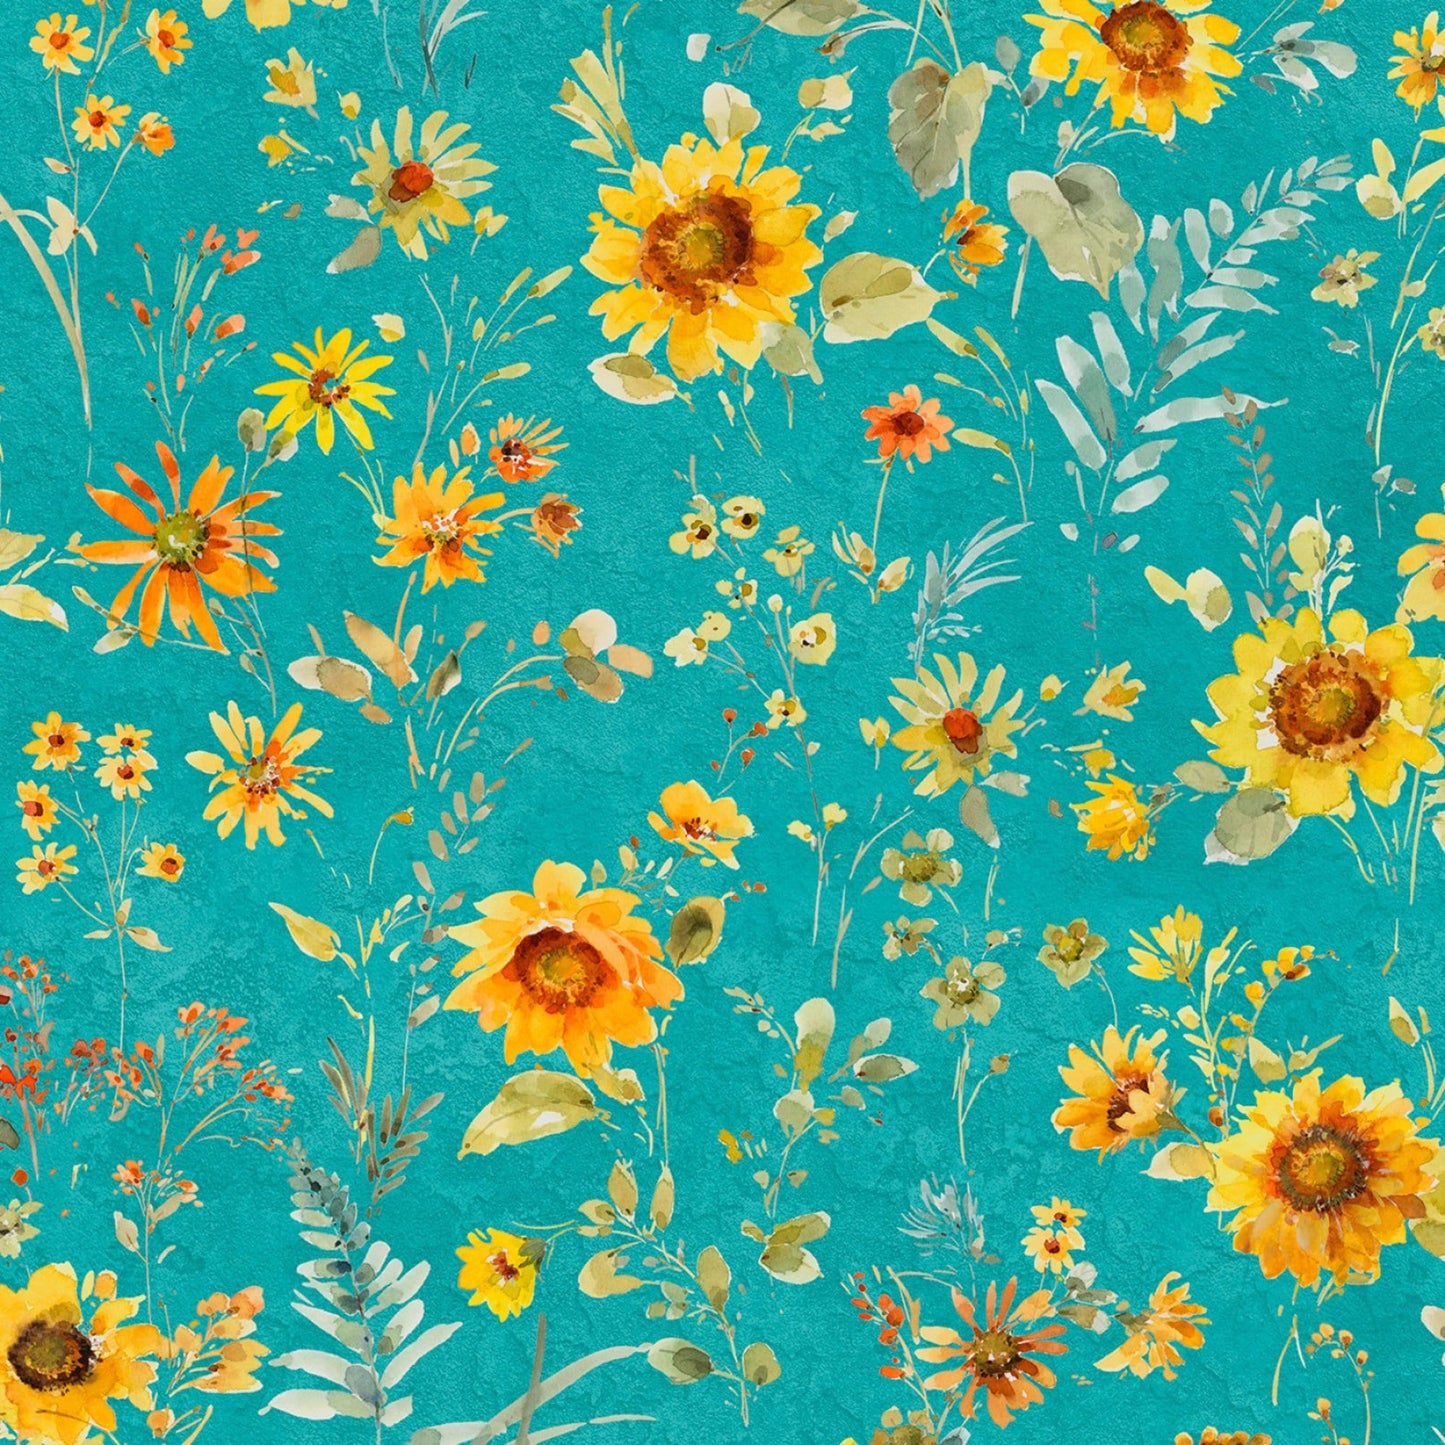 Wilmington Prints Teal (dark) / FQ (18"x21") Floral Sunflowers on teal or light teal, Fabric by the Yard from Wilmington Prints Sunflower Sweet by Lisa Audit